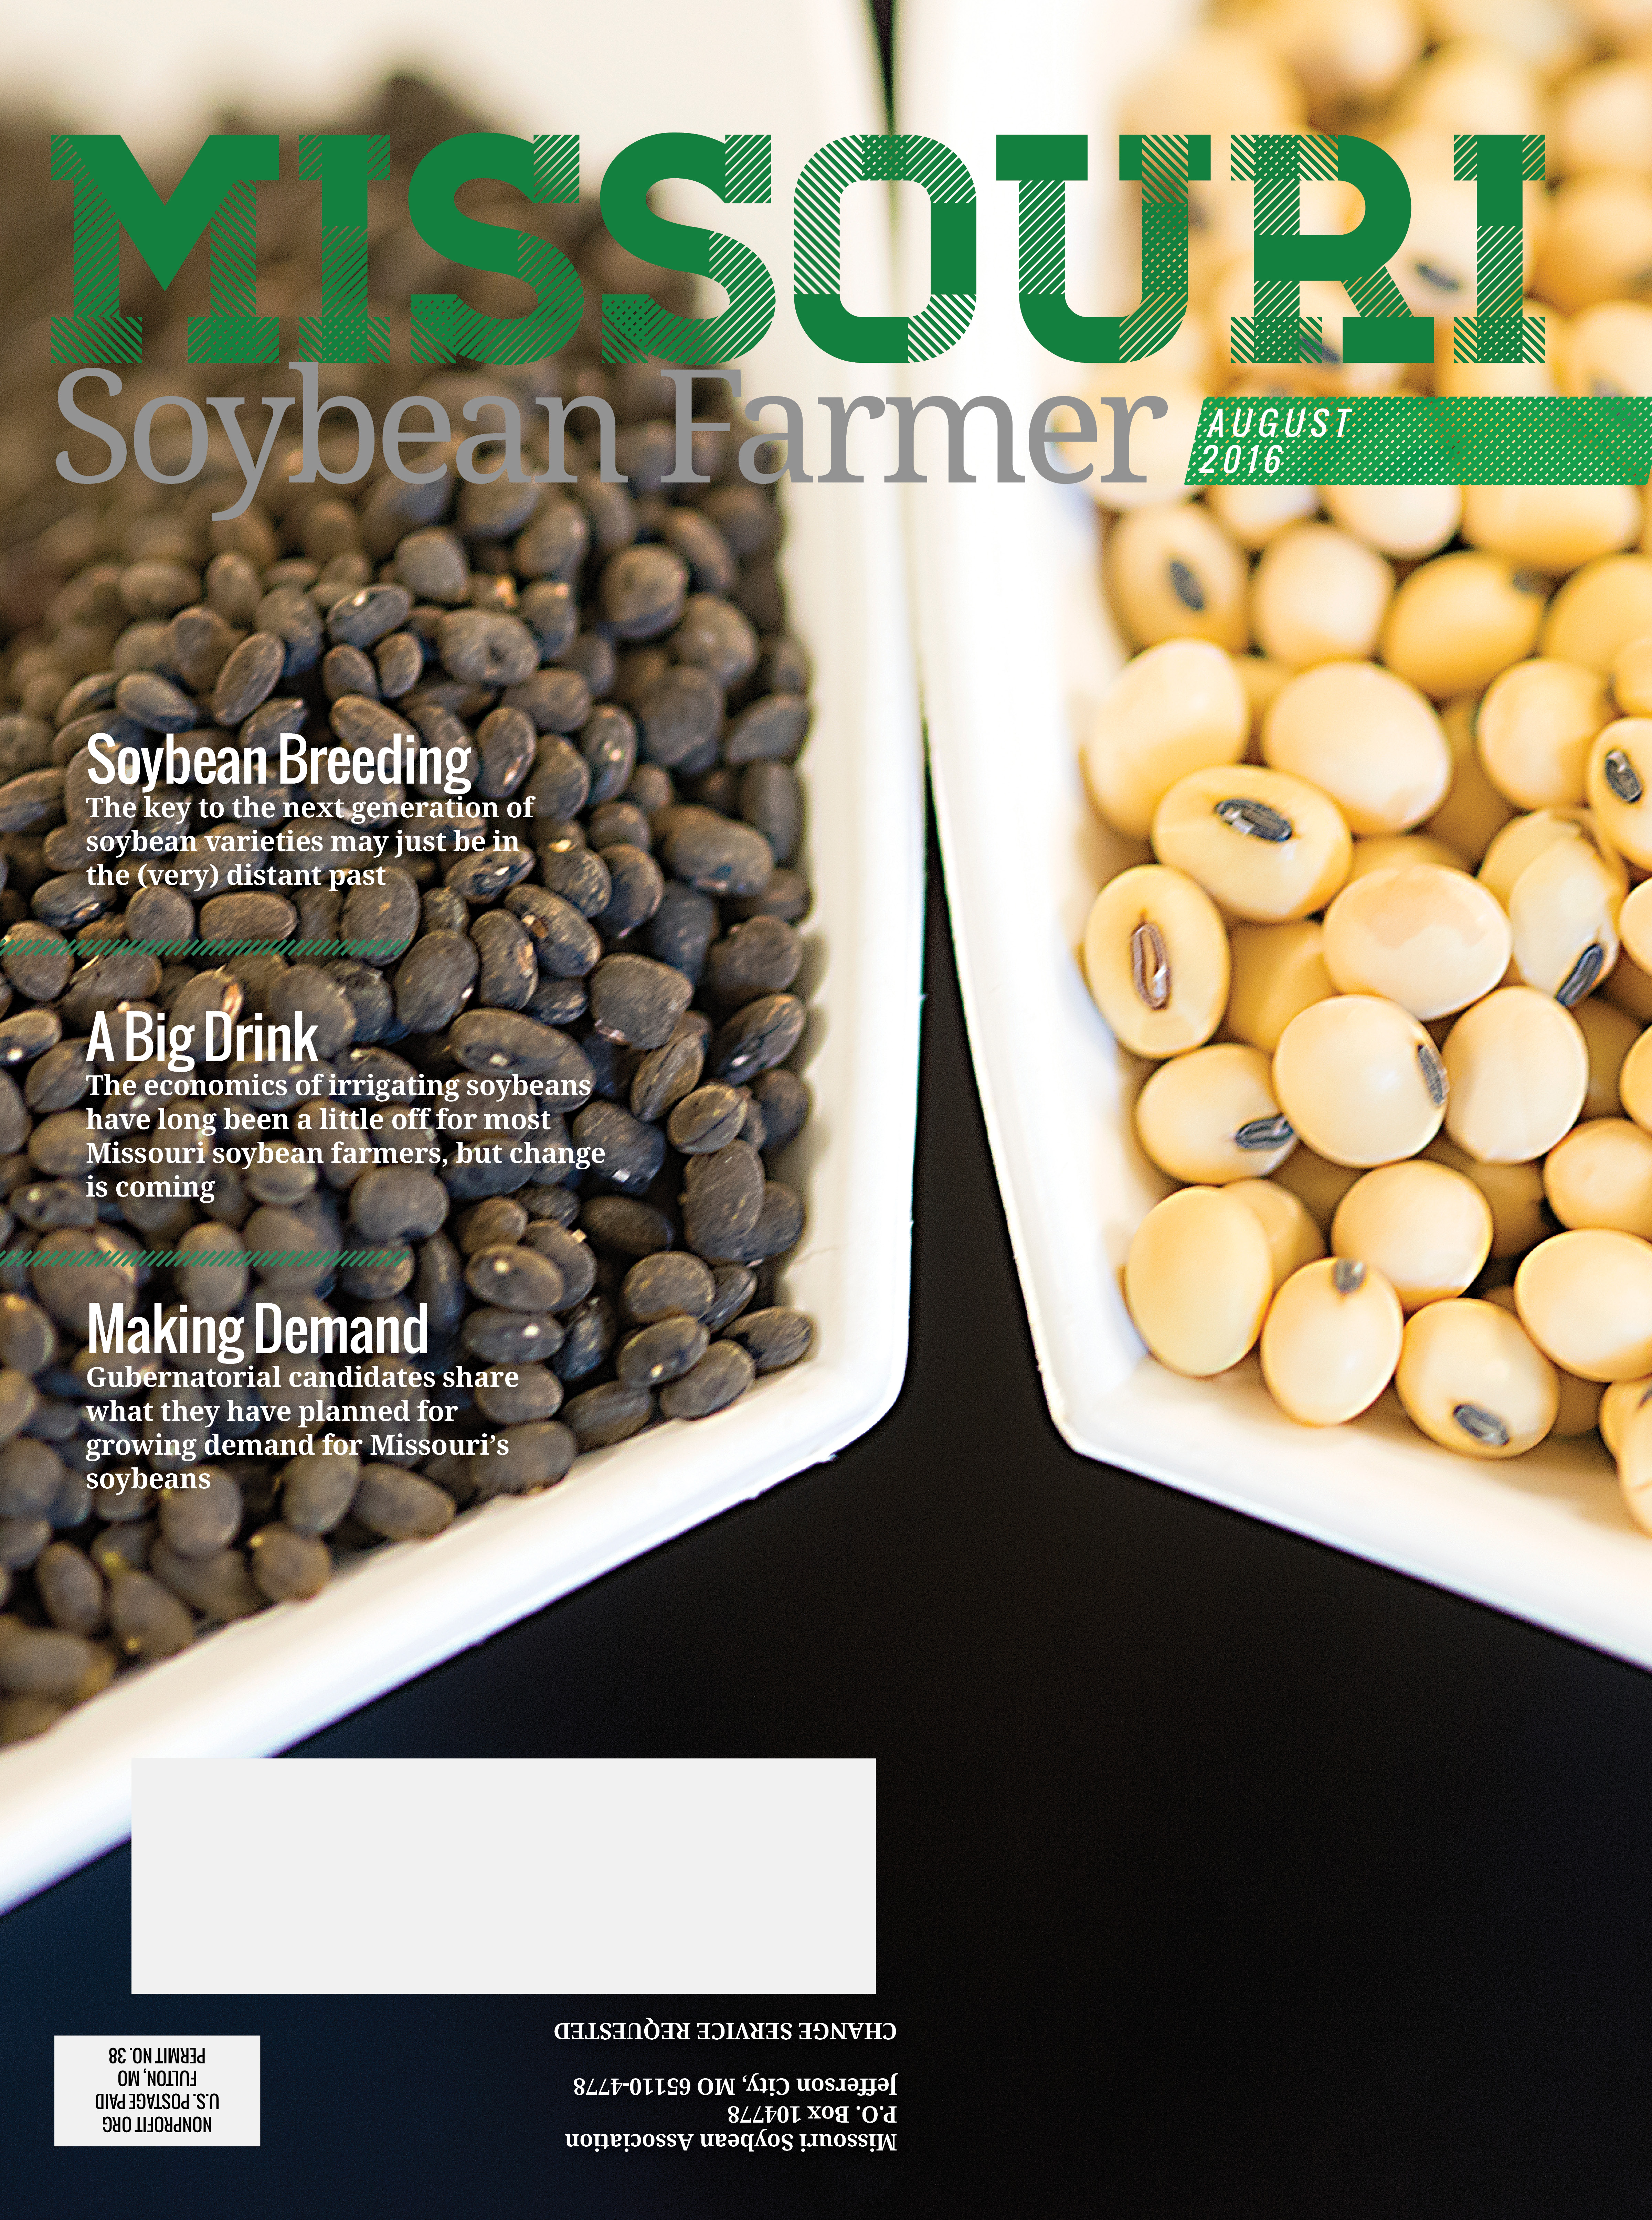 August 2016 Issue of Missouri Soybean Farmer Now Online